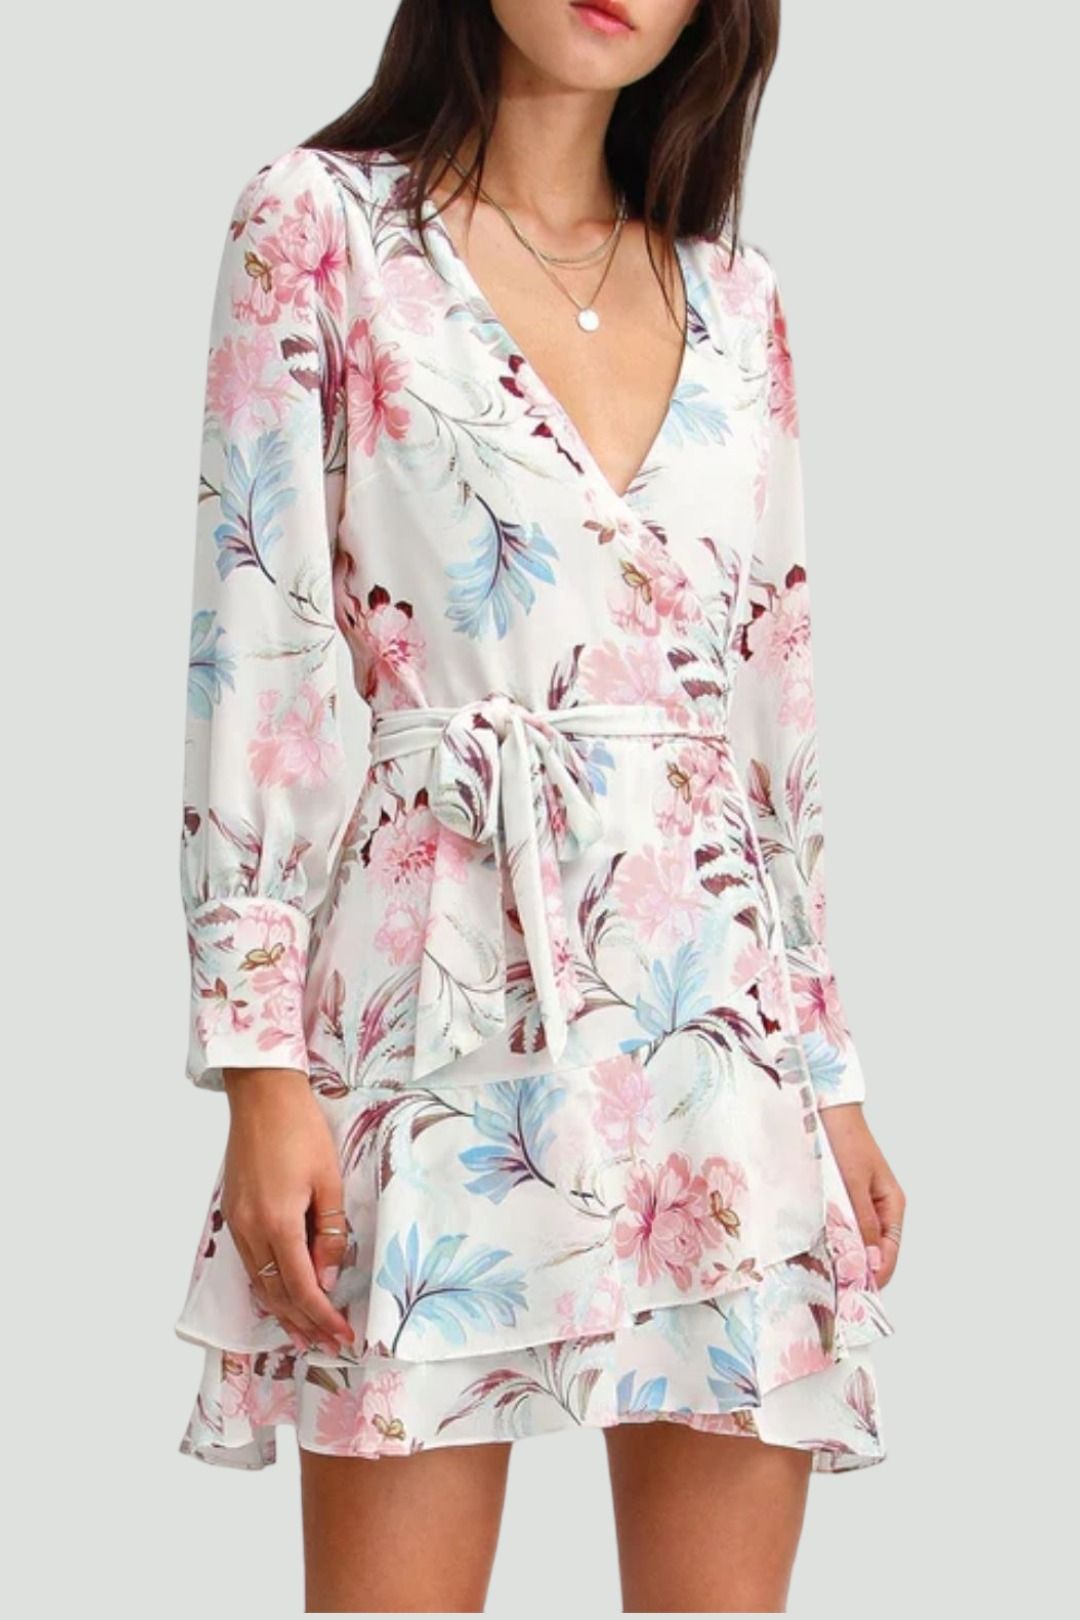 Belle And Bloom - A Night With You Mini Wrap Dress